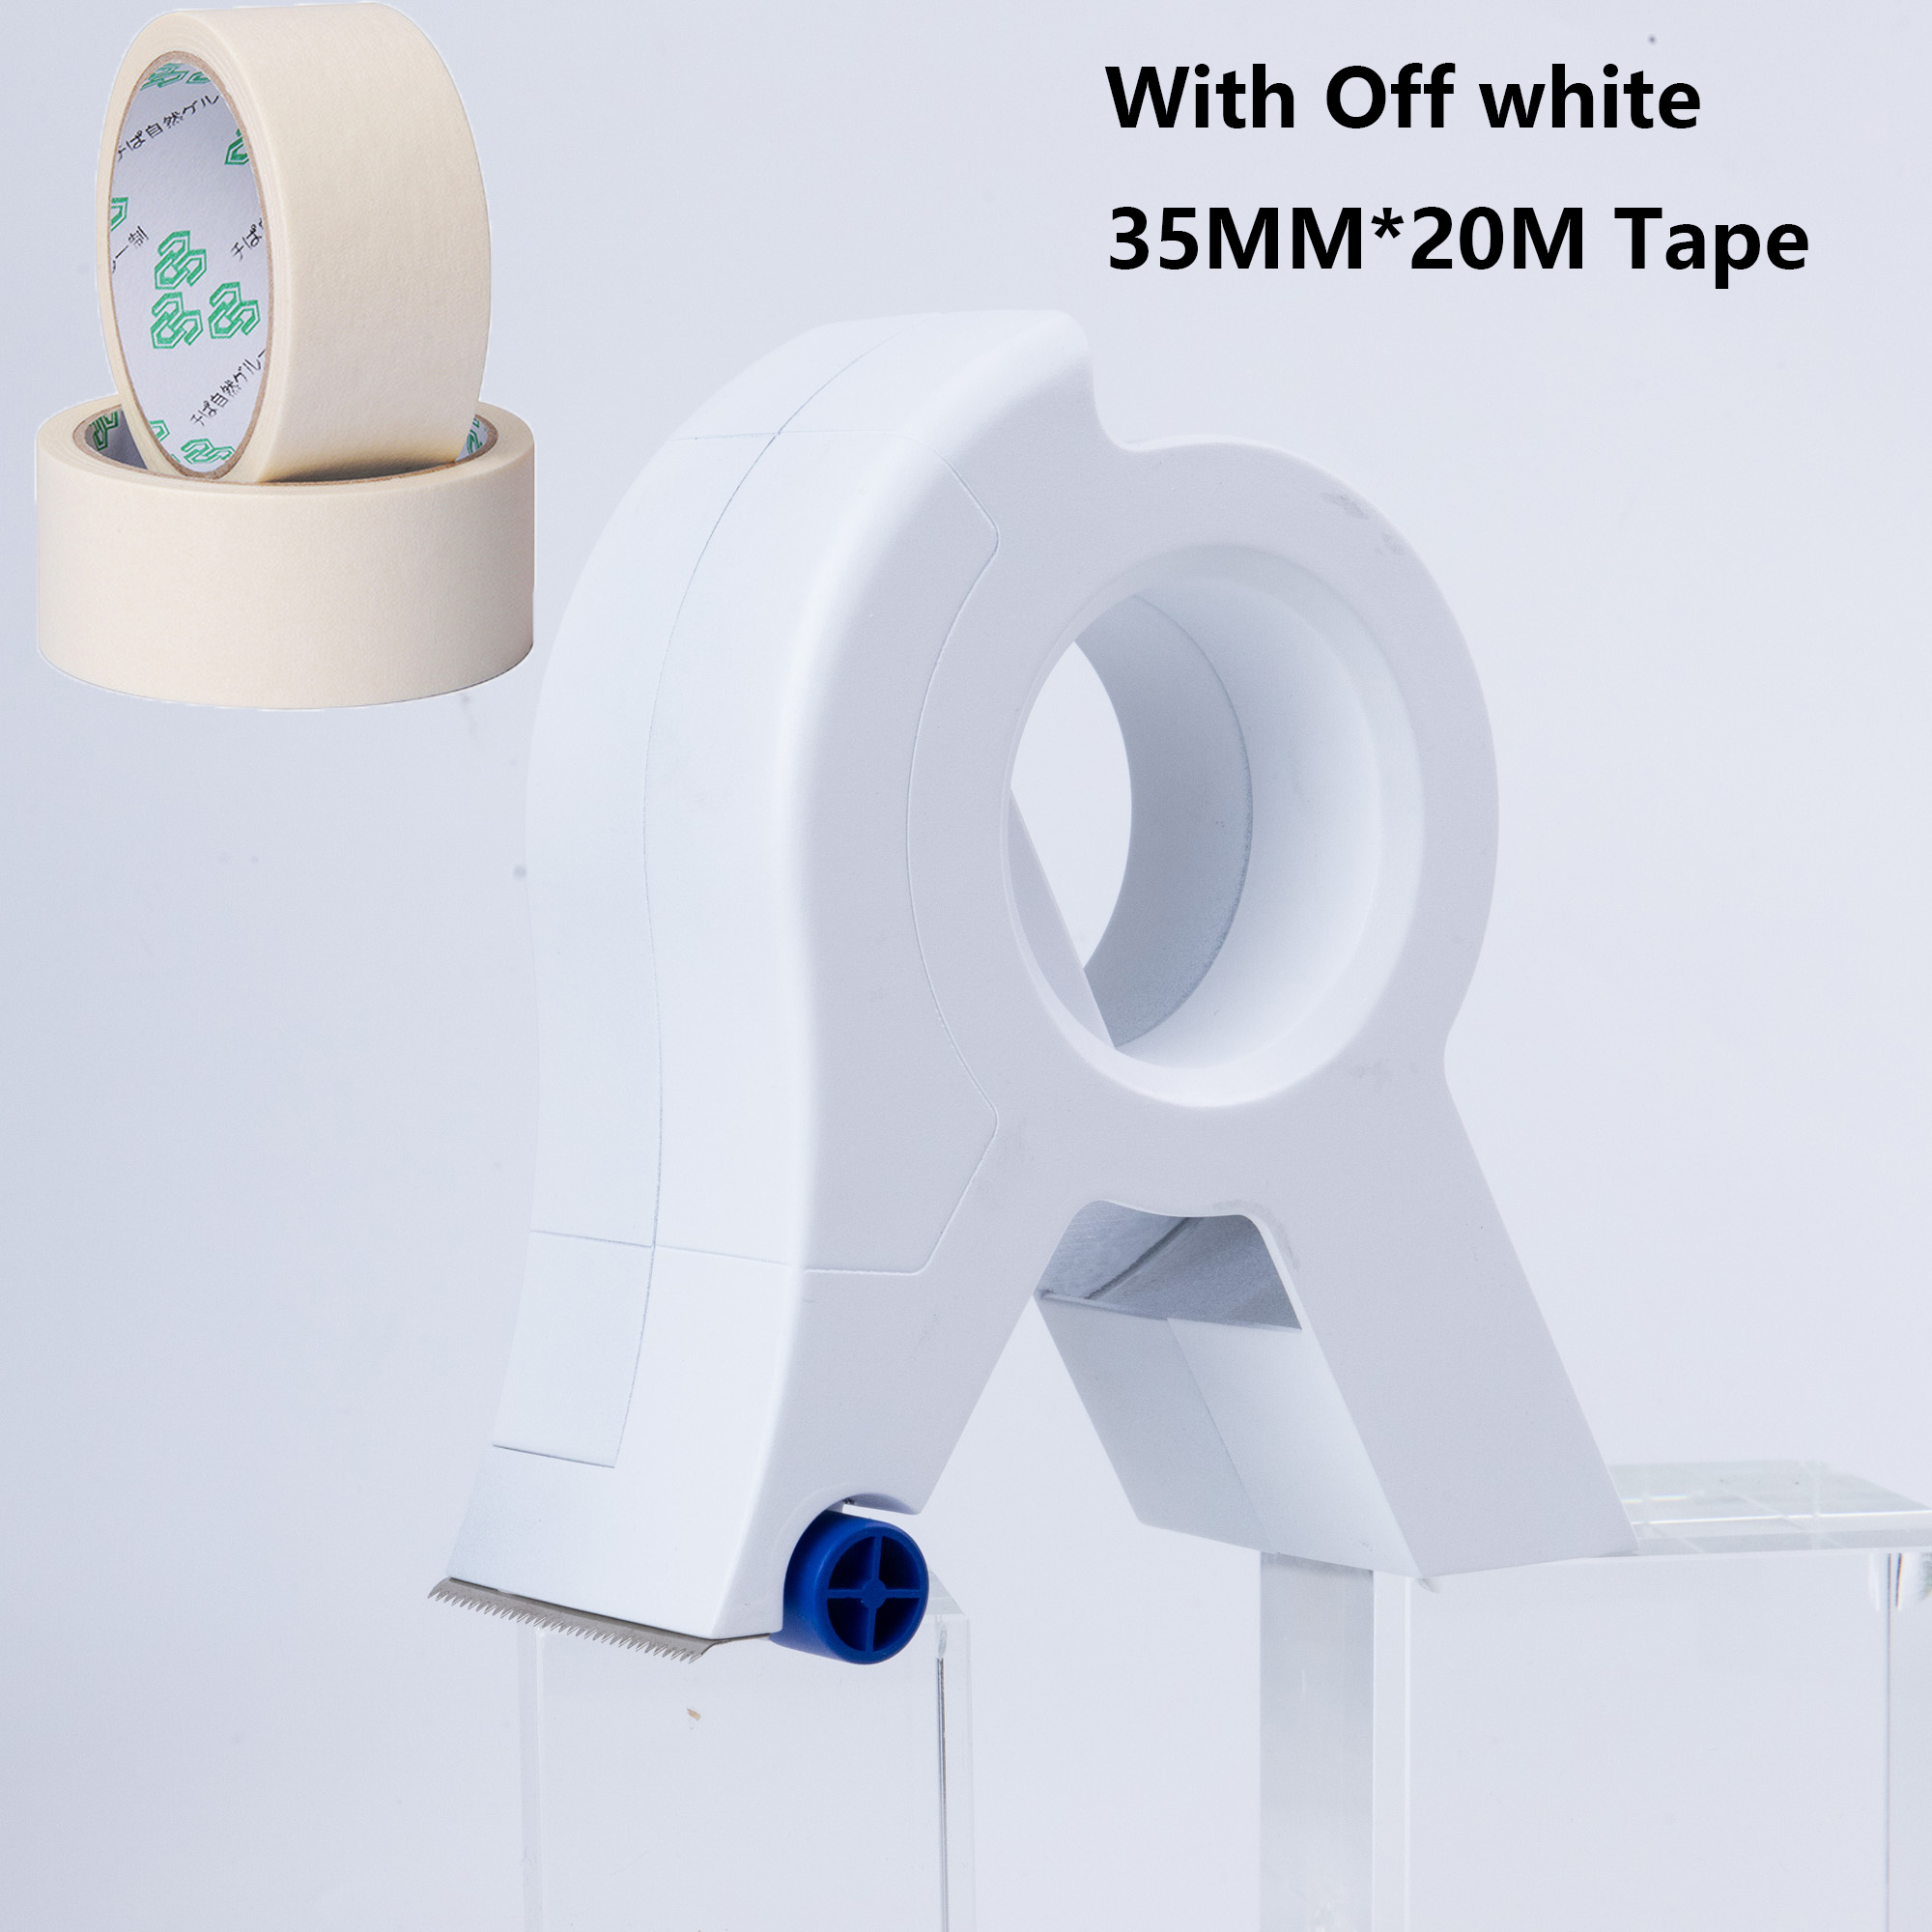 Painter Masking Tape Applicator Dispenser Machine Wall Floor Painting Packaging Sealing Pack Tape Tool Fit Tape 50mm Wide Max.: With A White Tape